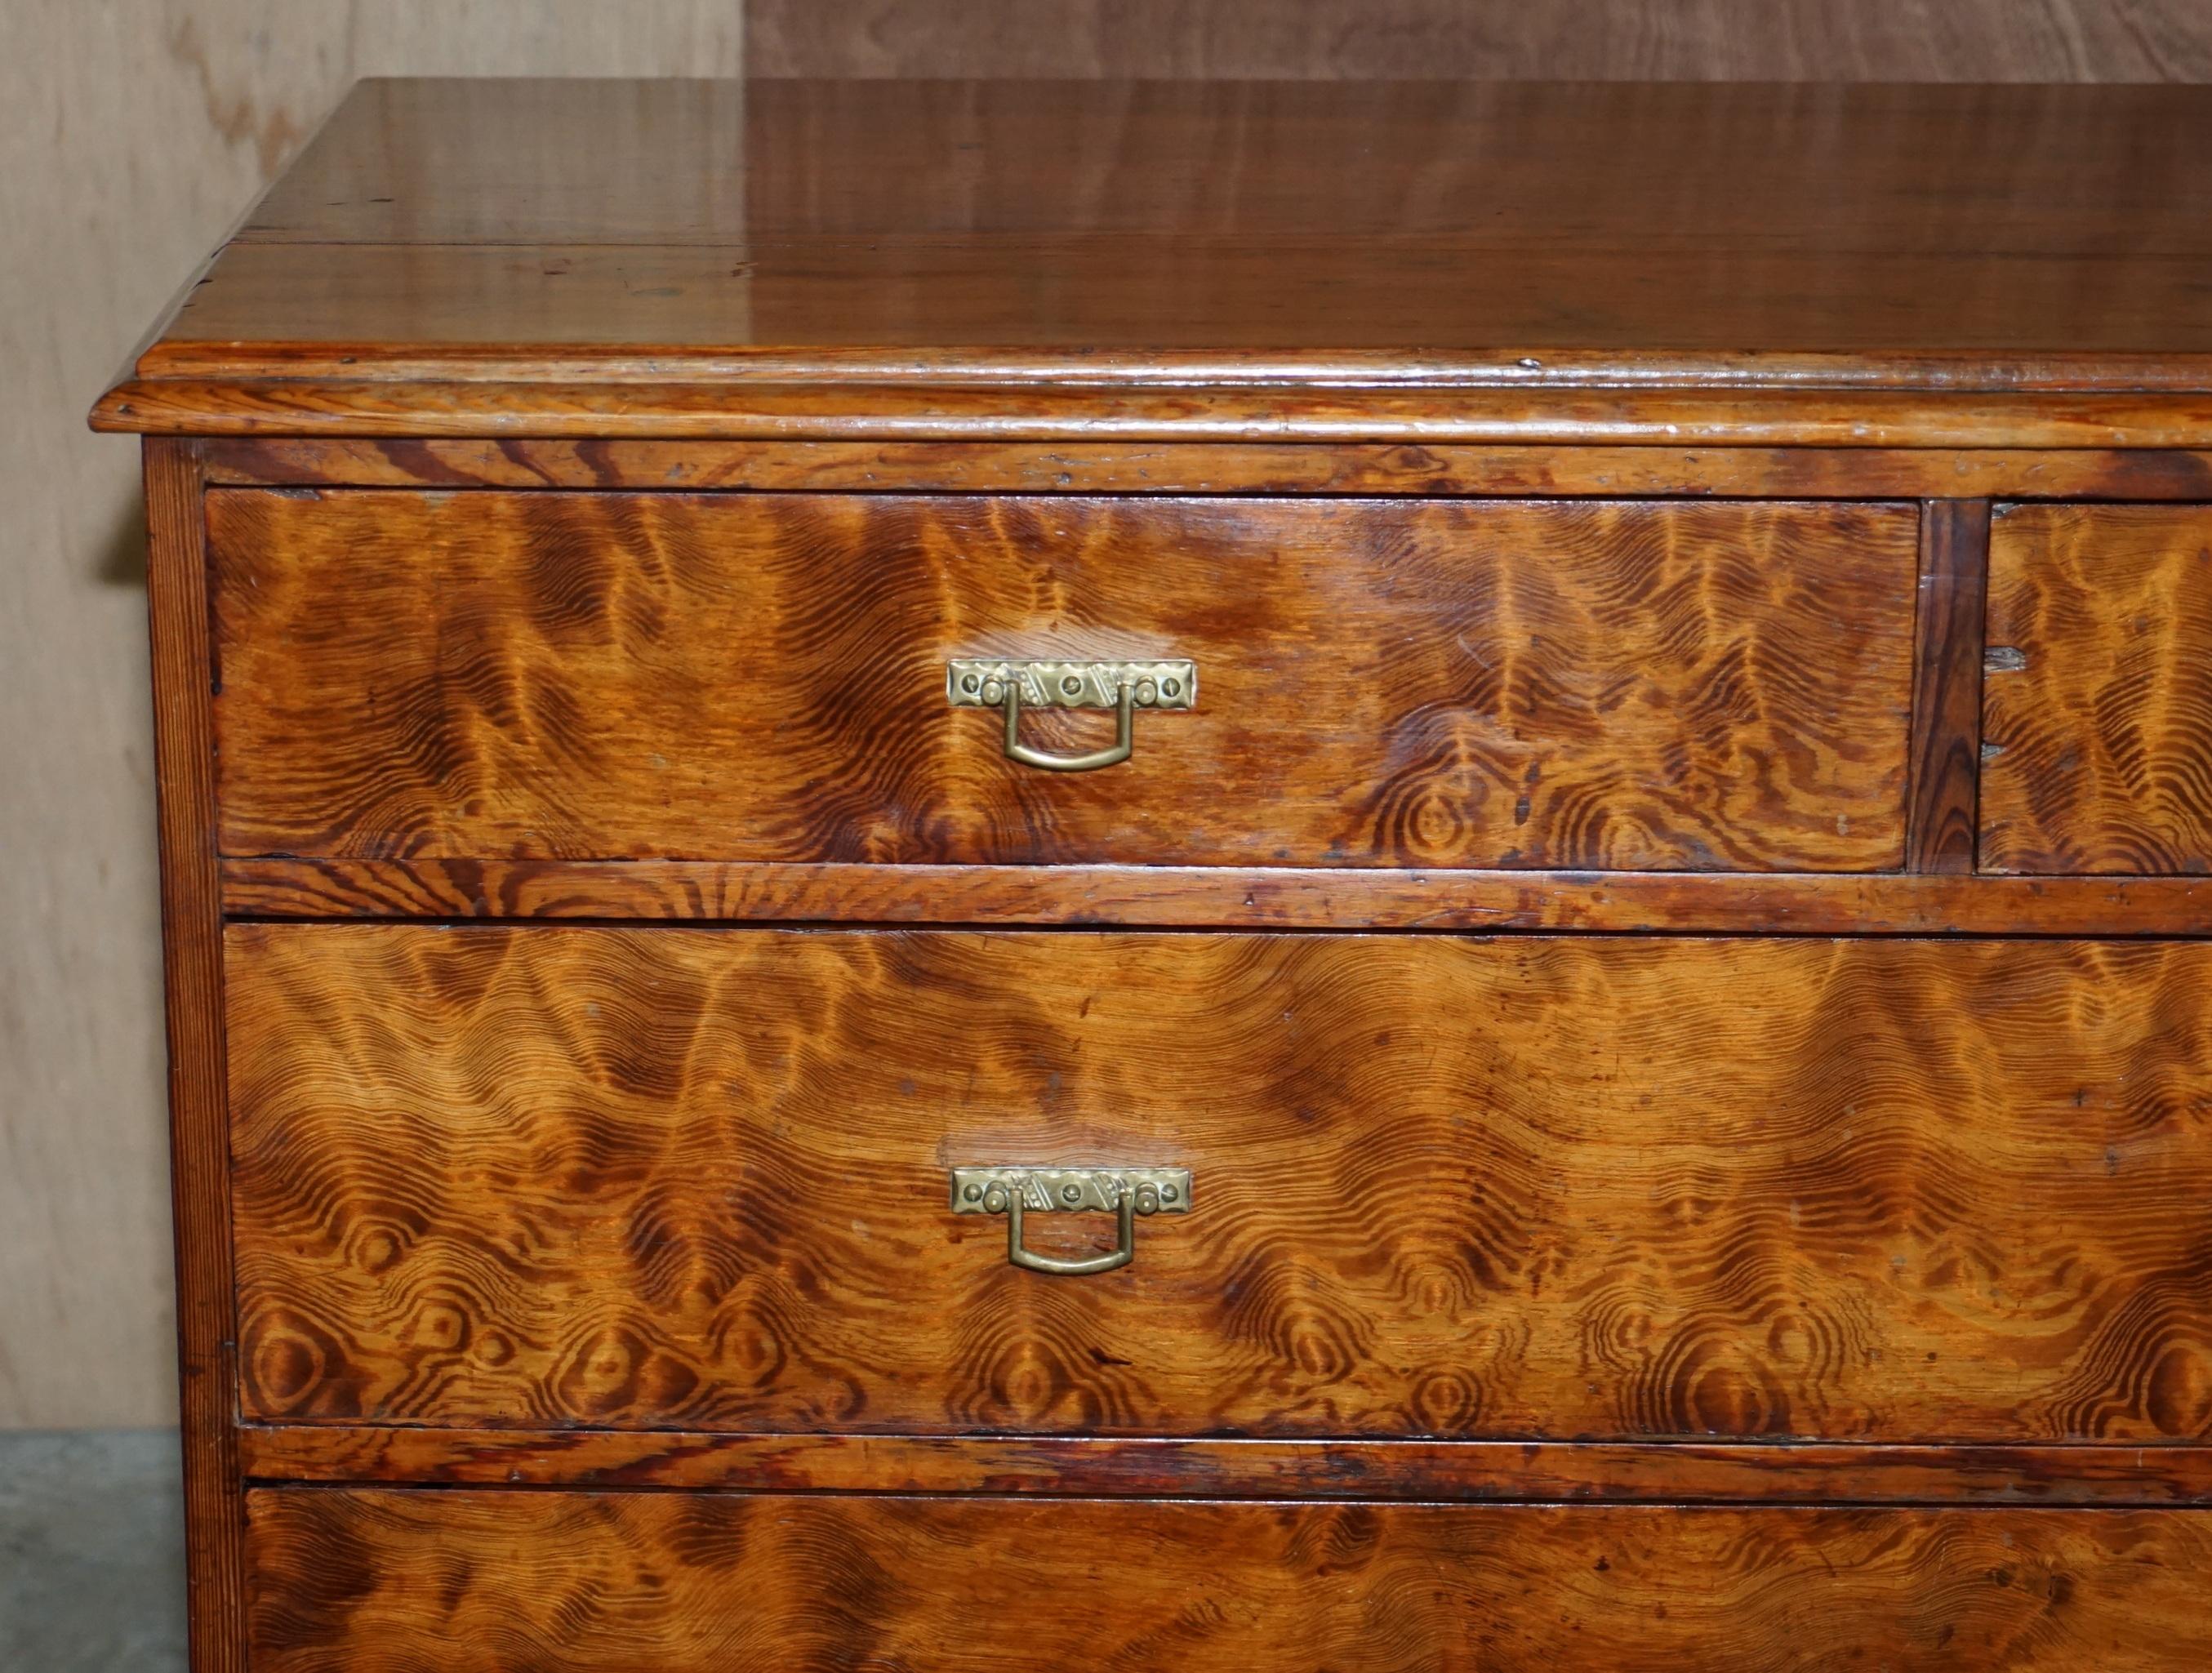 High Victorian Sublime Patina circa 1880 Pitch Pine Chest of Drawers Must See Timber Grain!!!!! For Sale